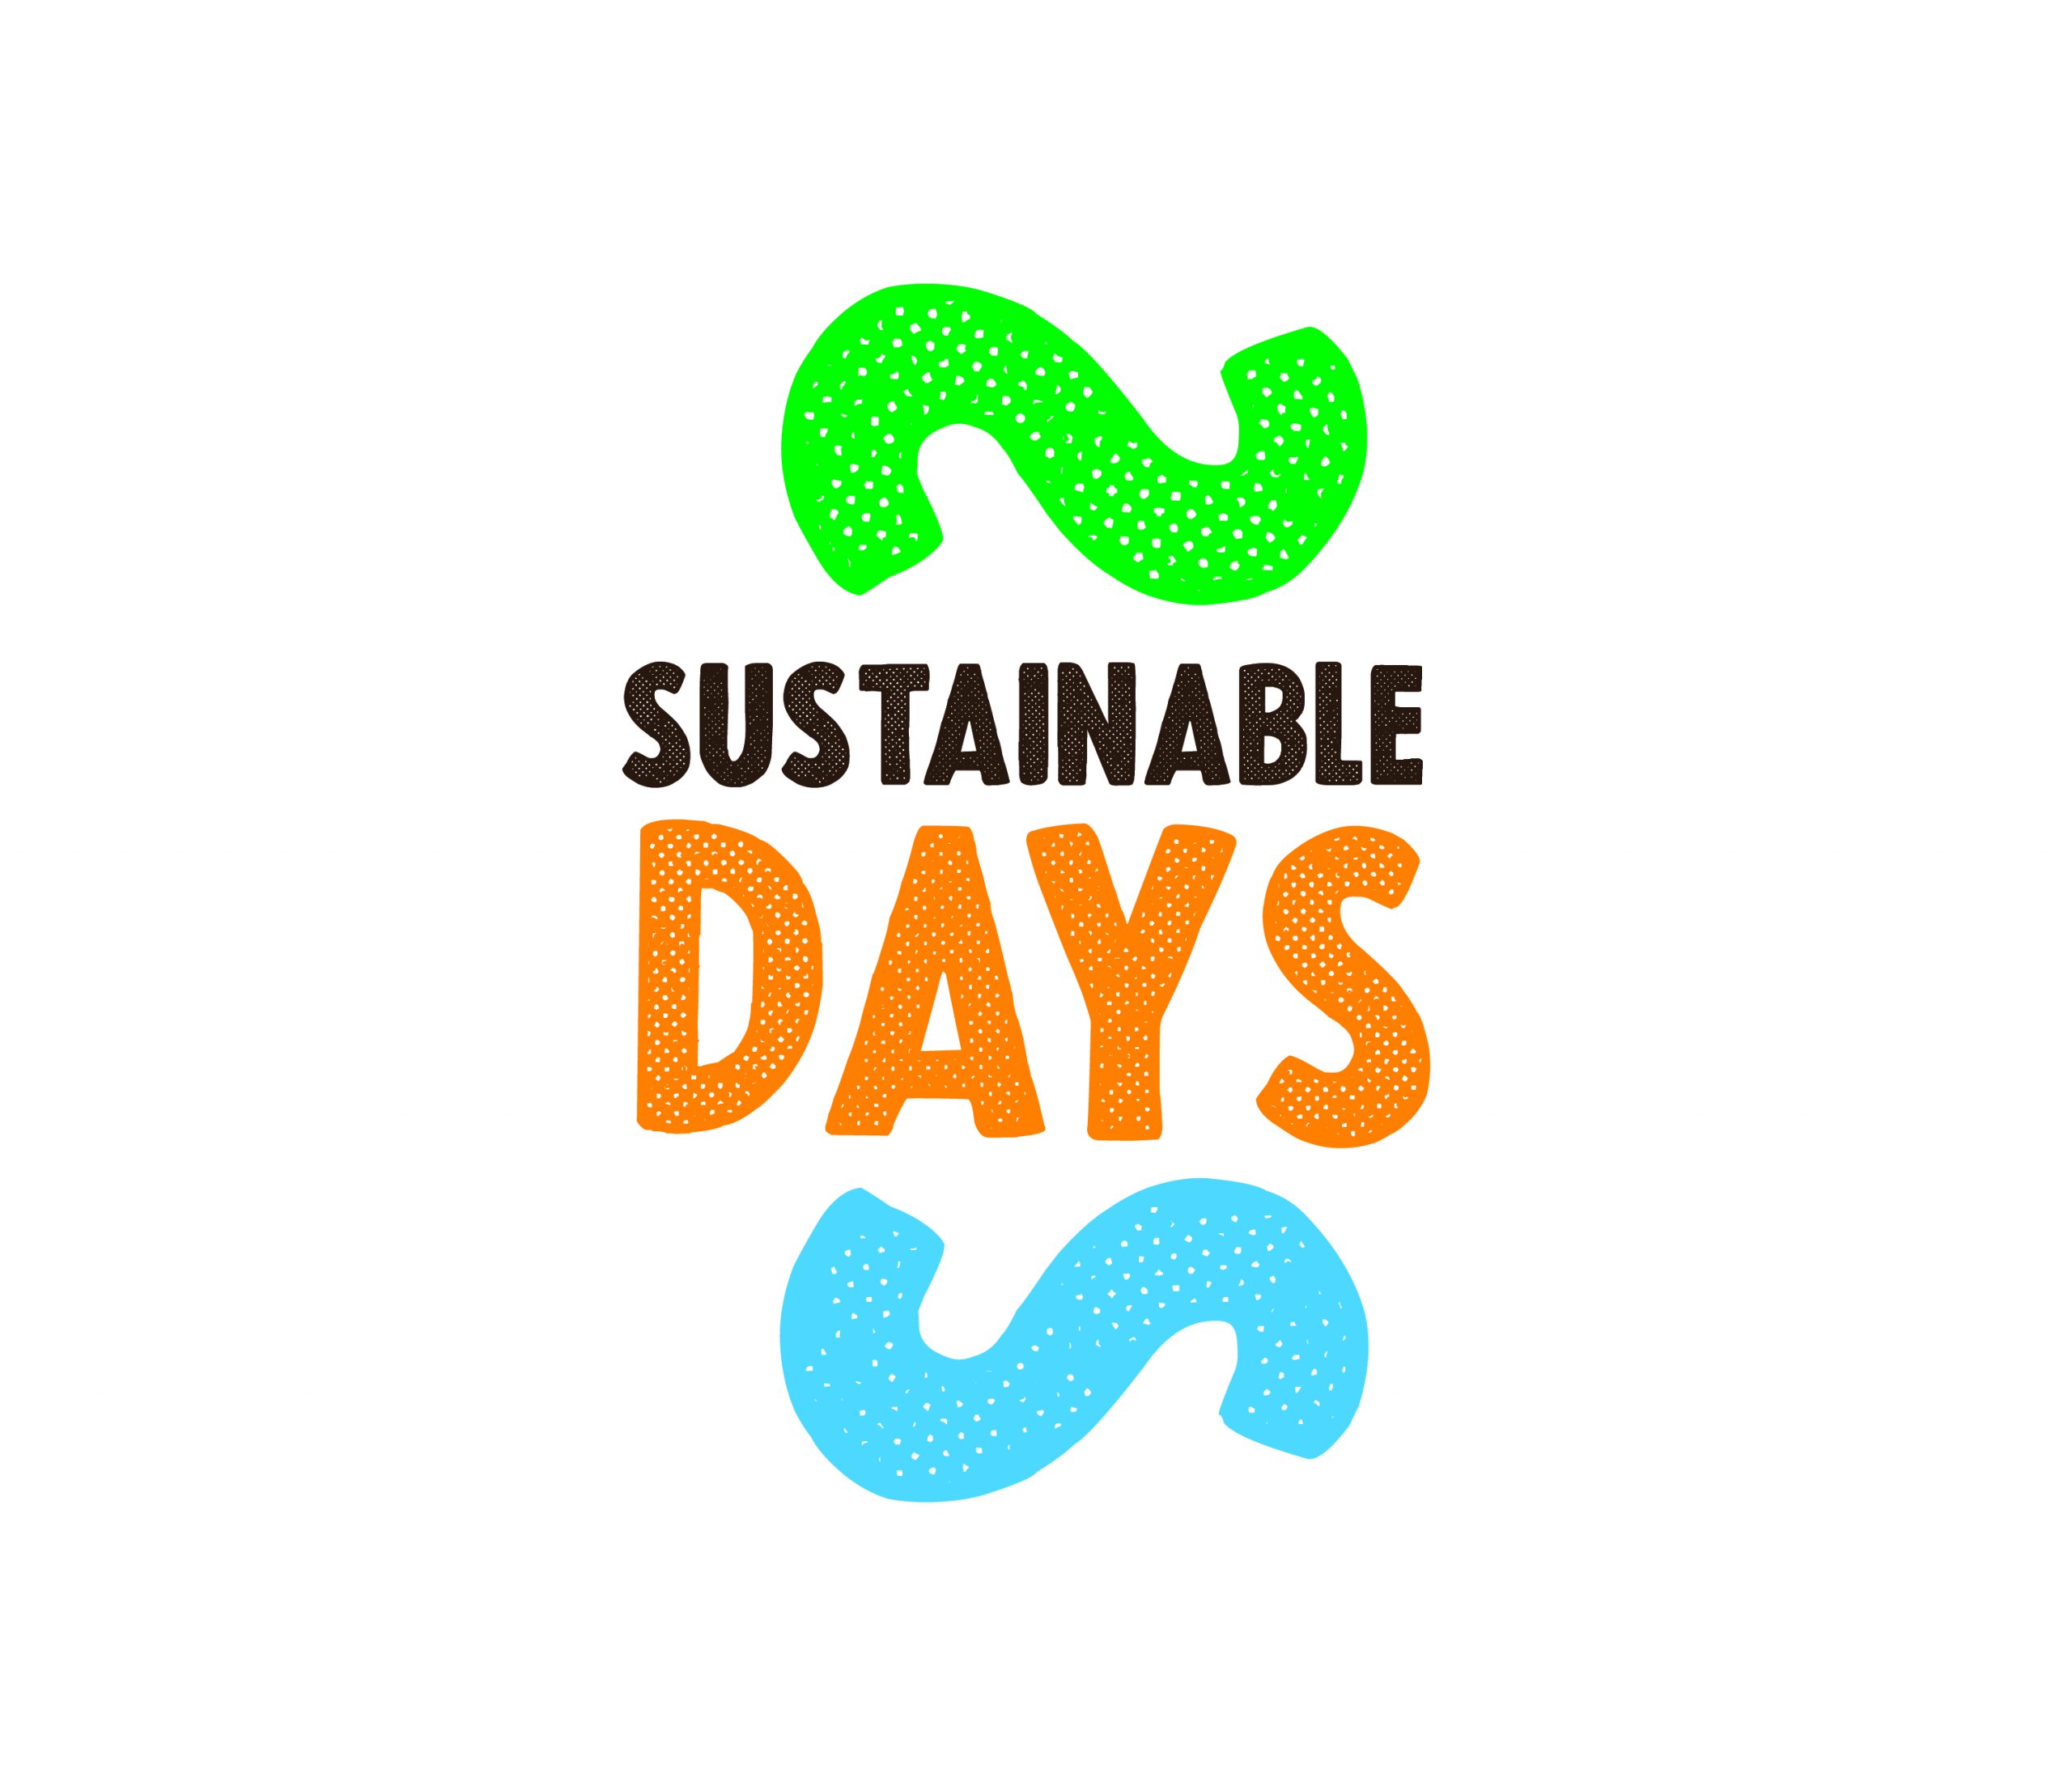 Dublin City Council presents ‘Sustainable Days’, an ONLINE event promoting sustainability and greener living